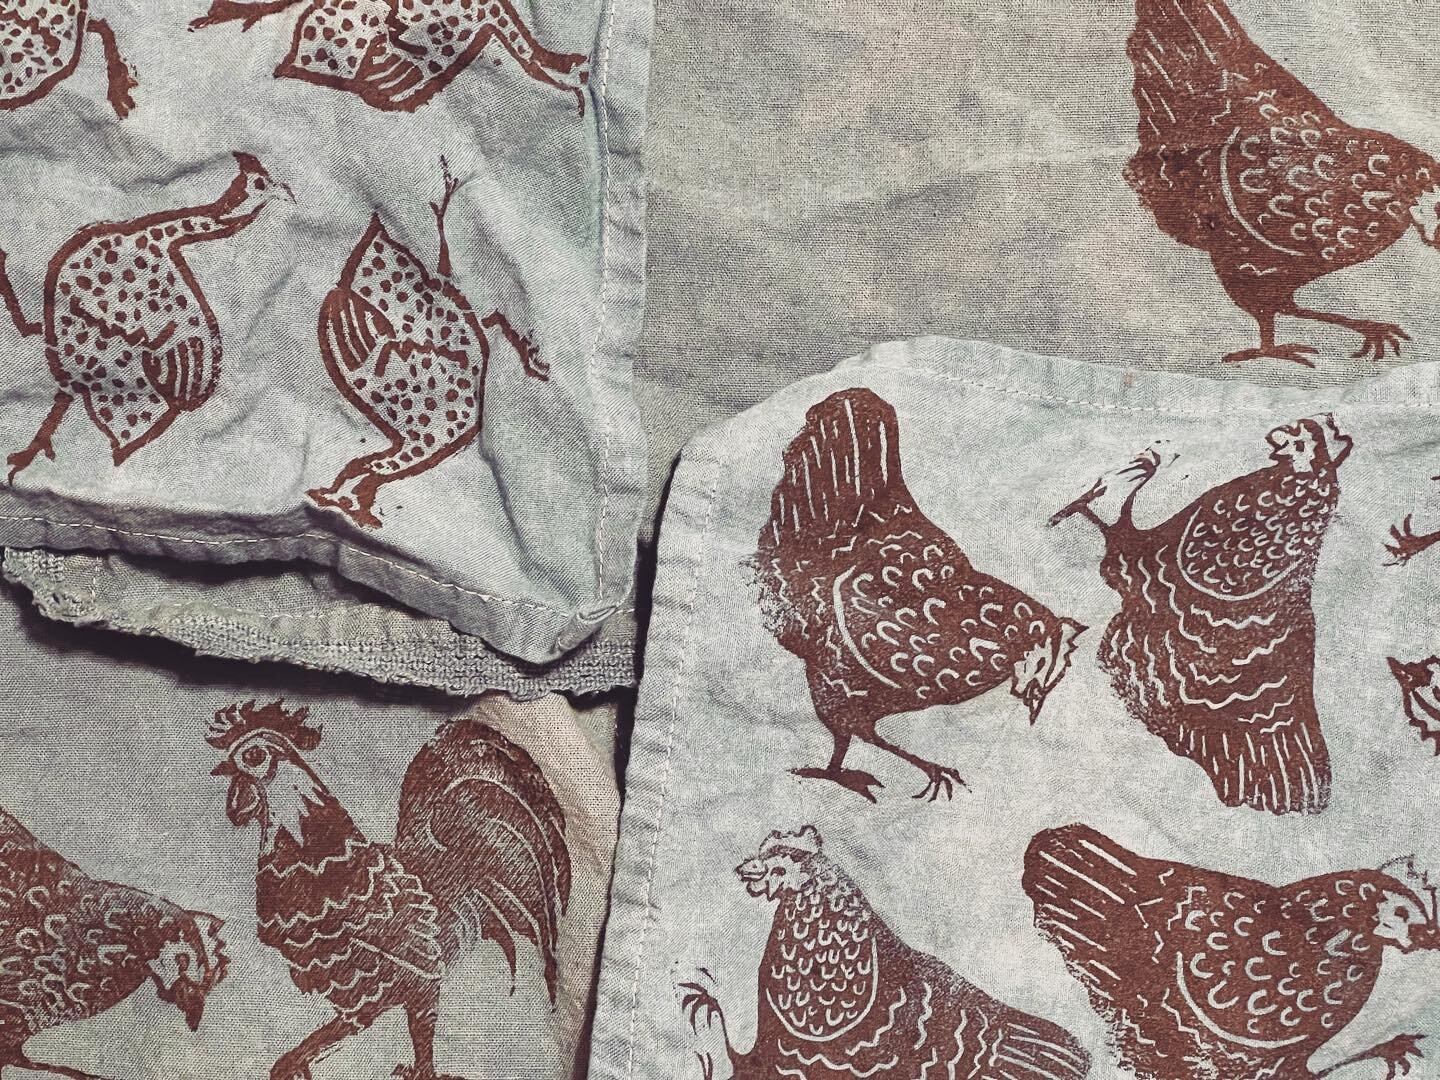 Introducing the chickens, roosters and guineas of indigo. Come by @pigpenpotteryva to check out amazing pottery and my latest work with Lino prints and natural dye. 

This photo doesn&rsquo;t do the rich color justice! 
#greatfallsstudios #greatfalls